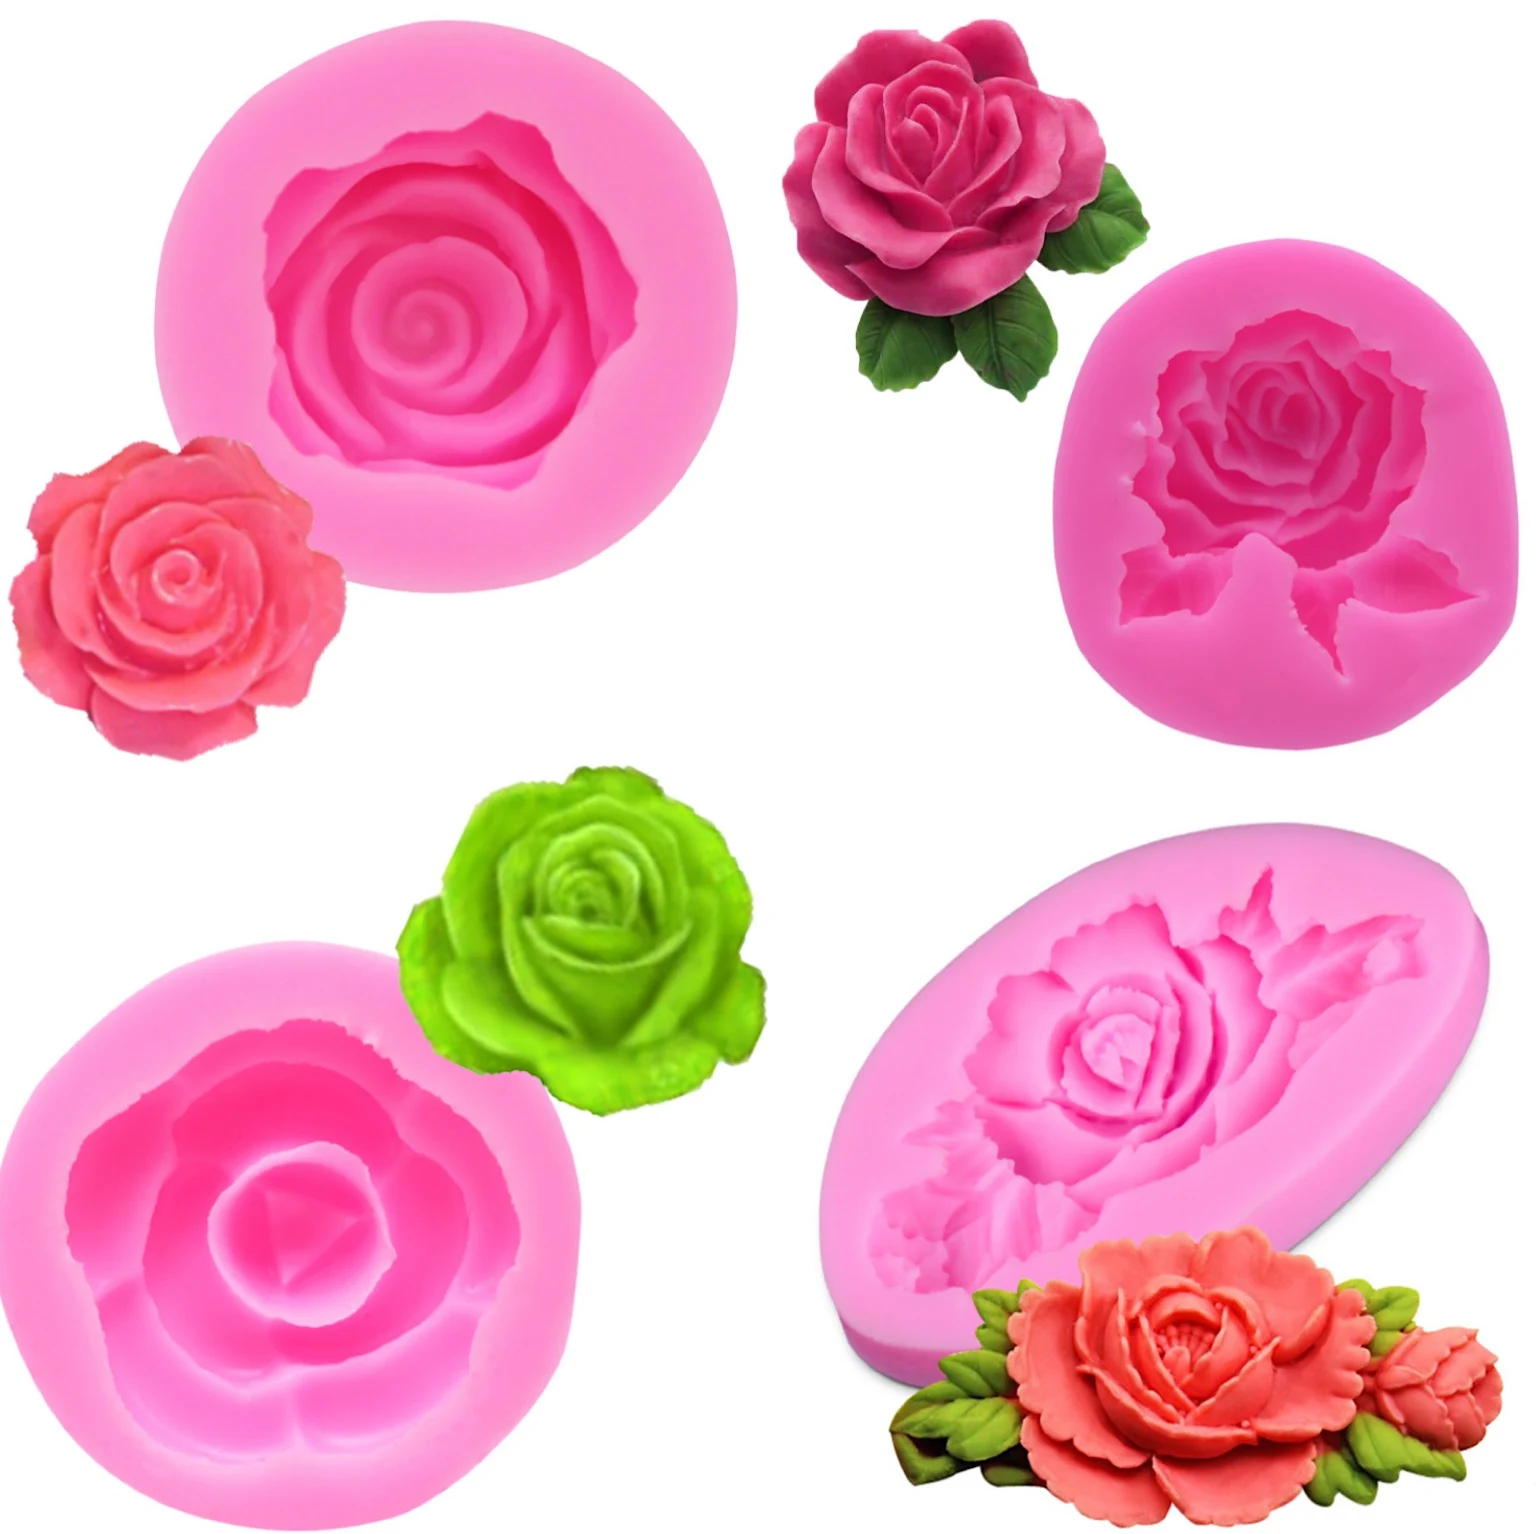 Chocolate Mould C1A5 SELL T1G4 3D Rose Flower Silicone Fondant Mold Cake Decor 